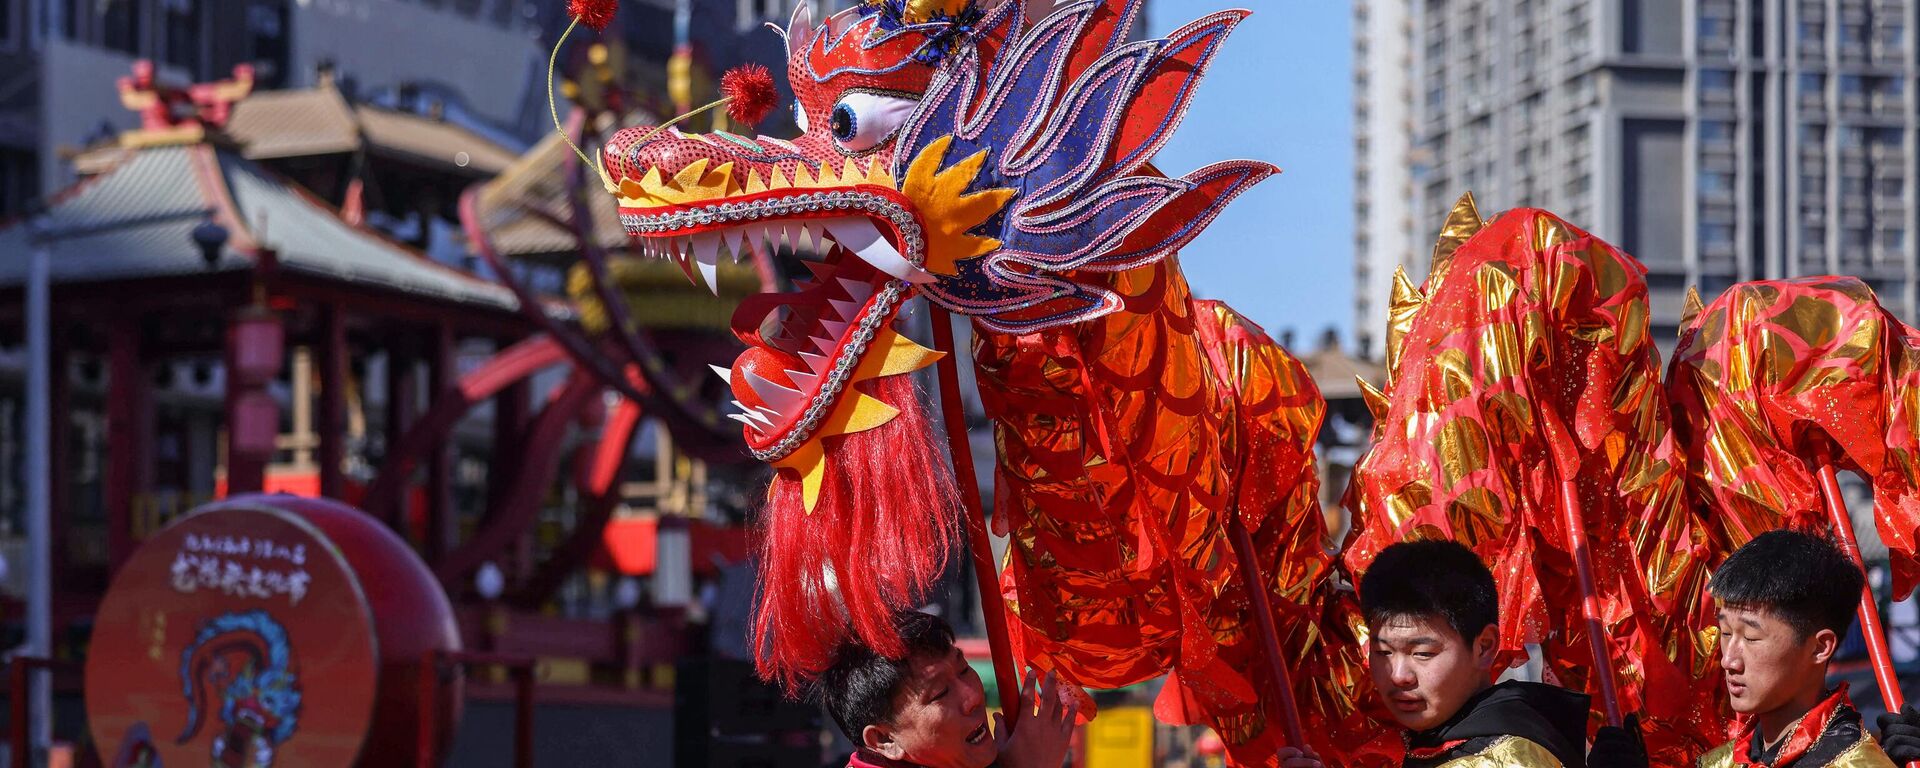 People perform a dragon dance to celebrate the Longtaitou Festival, which means Dragon raising its head and falls on the second day of the second month of the Chinese calendar, in Shenyang in China's northeastern Liaoning province on February 21, 2023. (Photo by AFP) / China OUT - Sputnik International, 1920, 07.03.2023